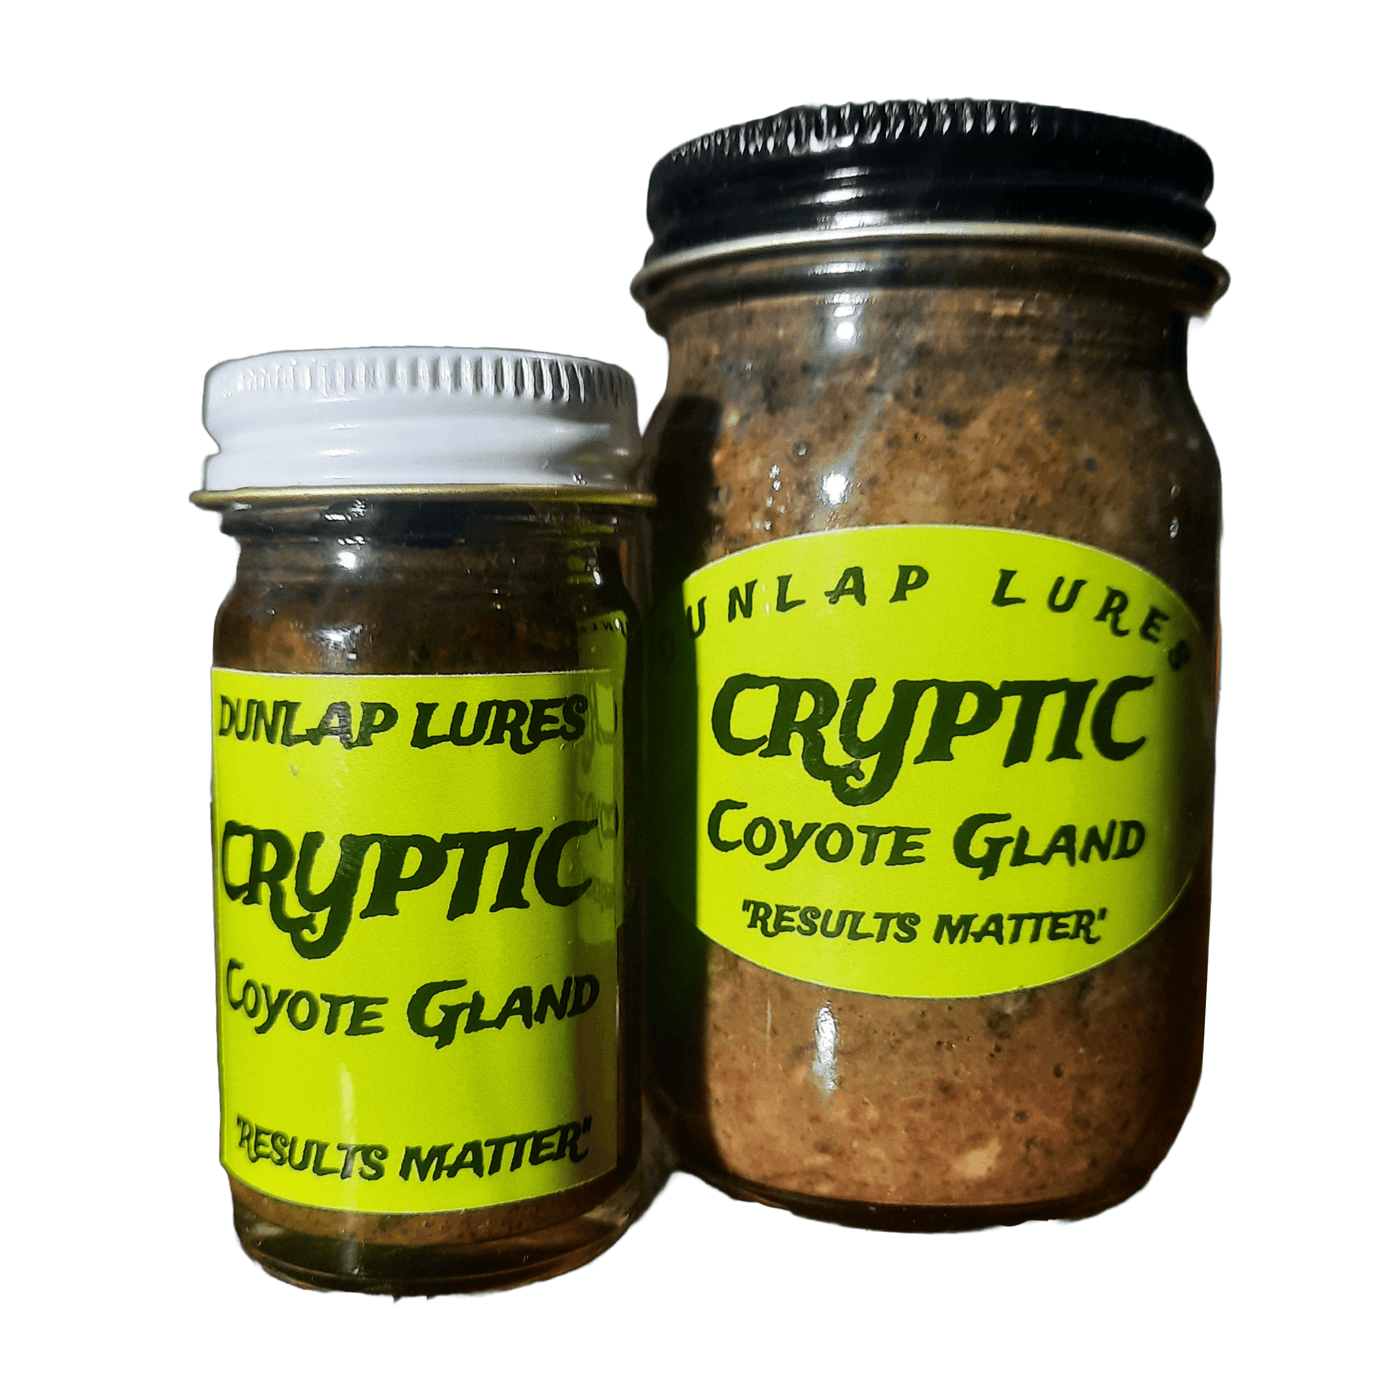 Dunlap's Cryptic Coyote Gland Lure – TrapShed Supply Co.